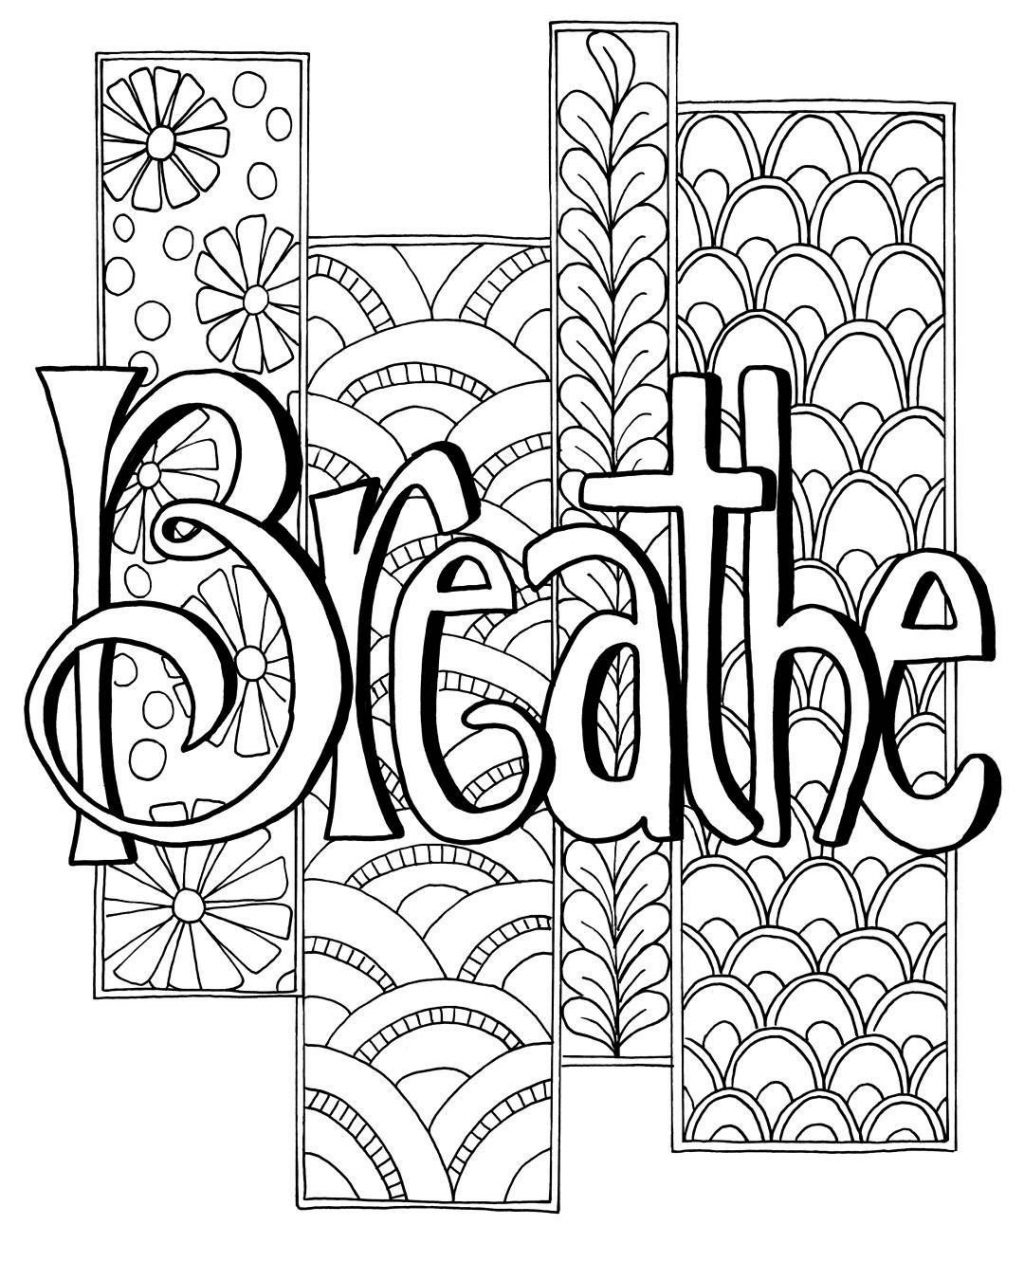 Word Coloring Page Generator Coloring Page Word Coloring Page Generator